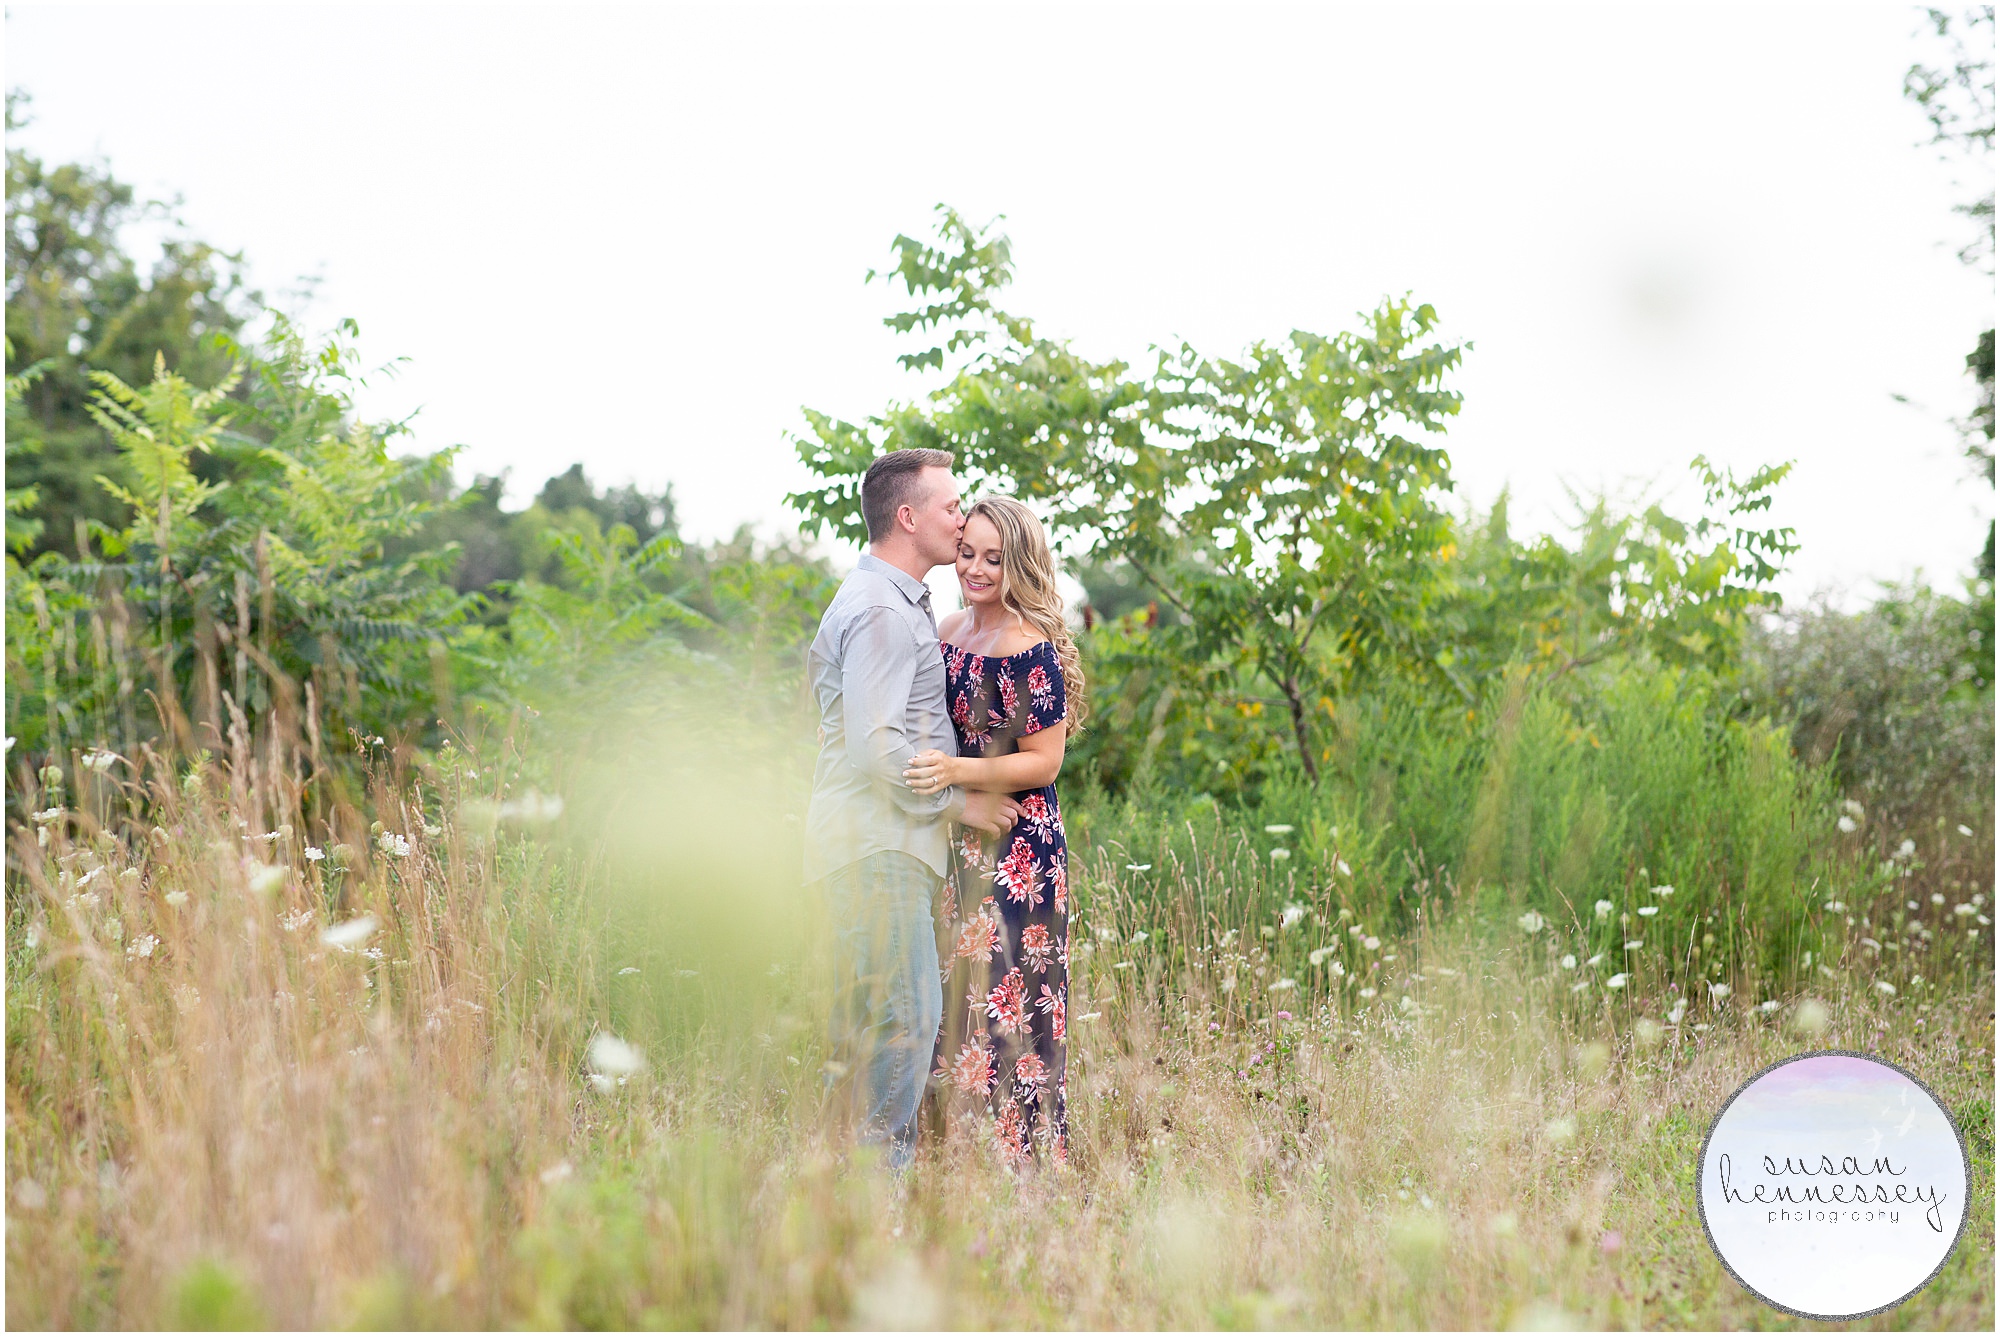 Rustic engagement session in Doylestown, PA